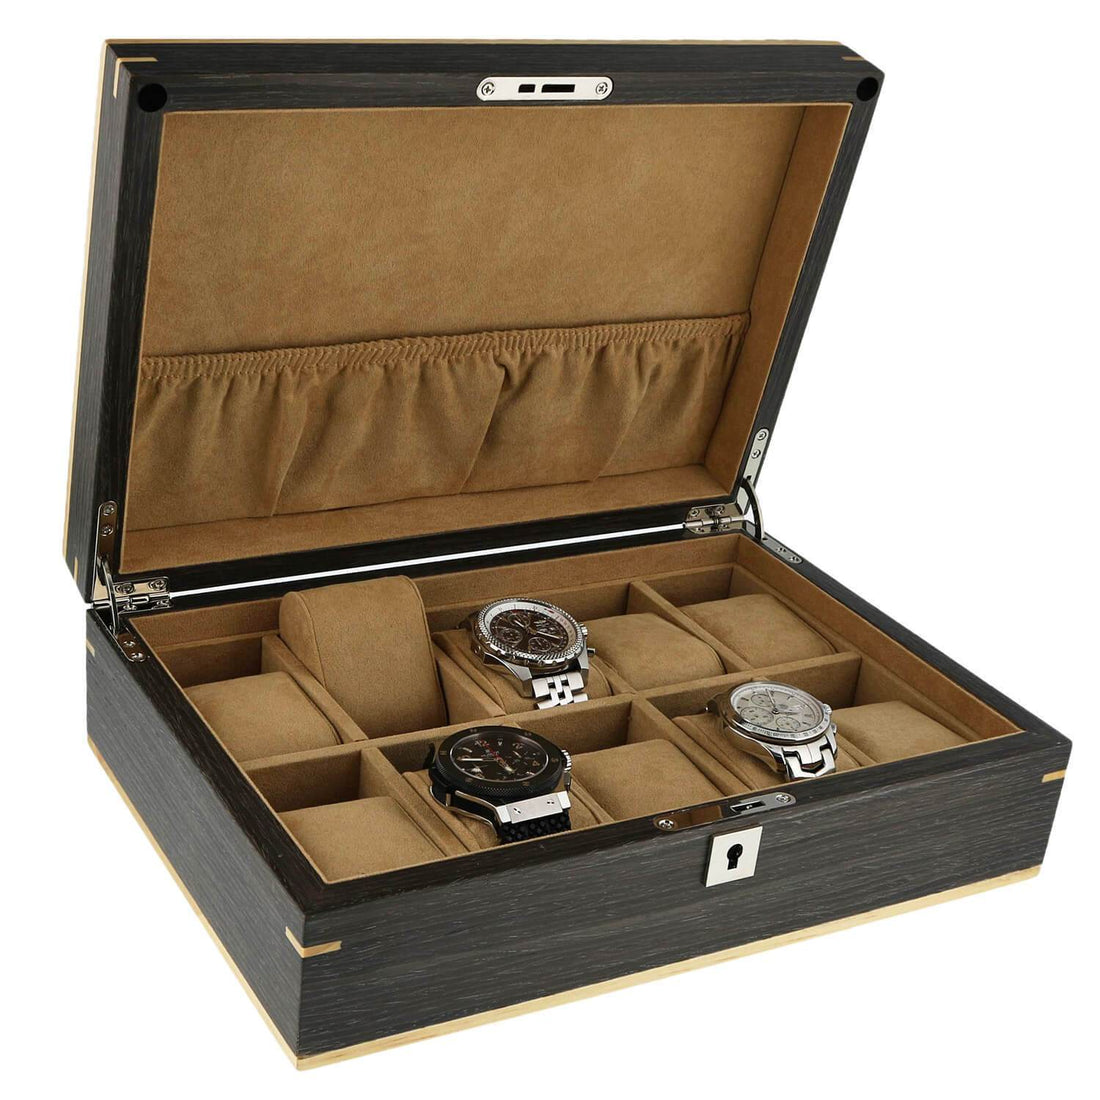 How to Organize Your Watch Collection with Watch Boxes